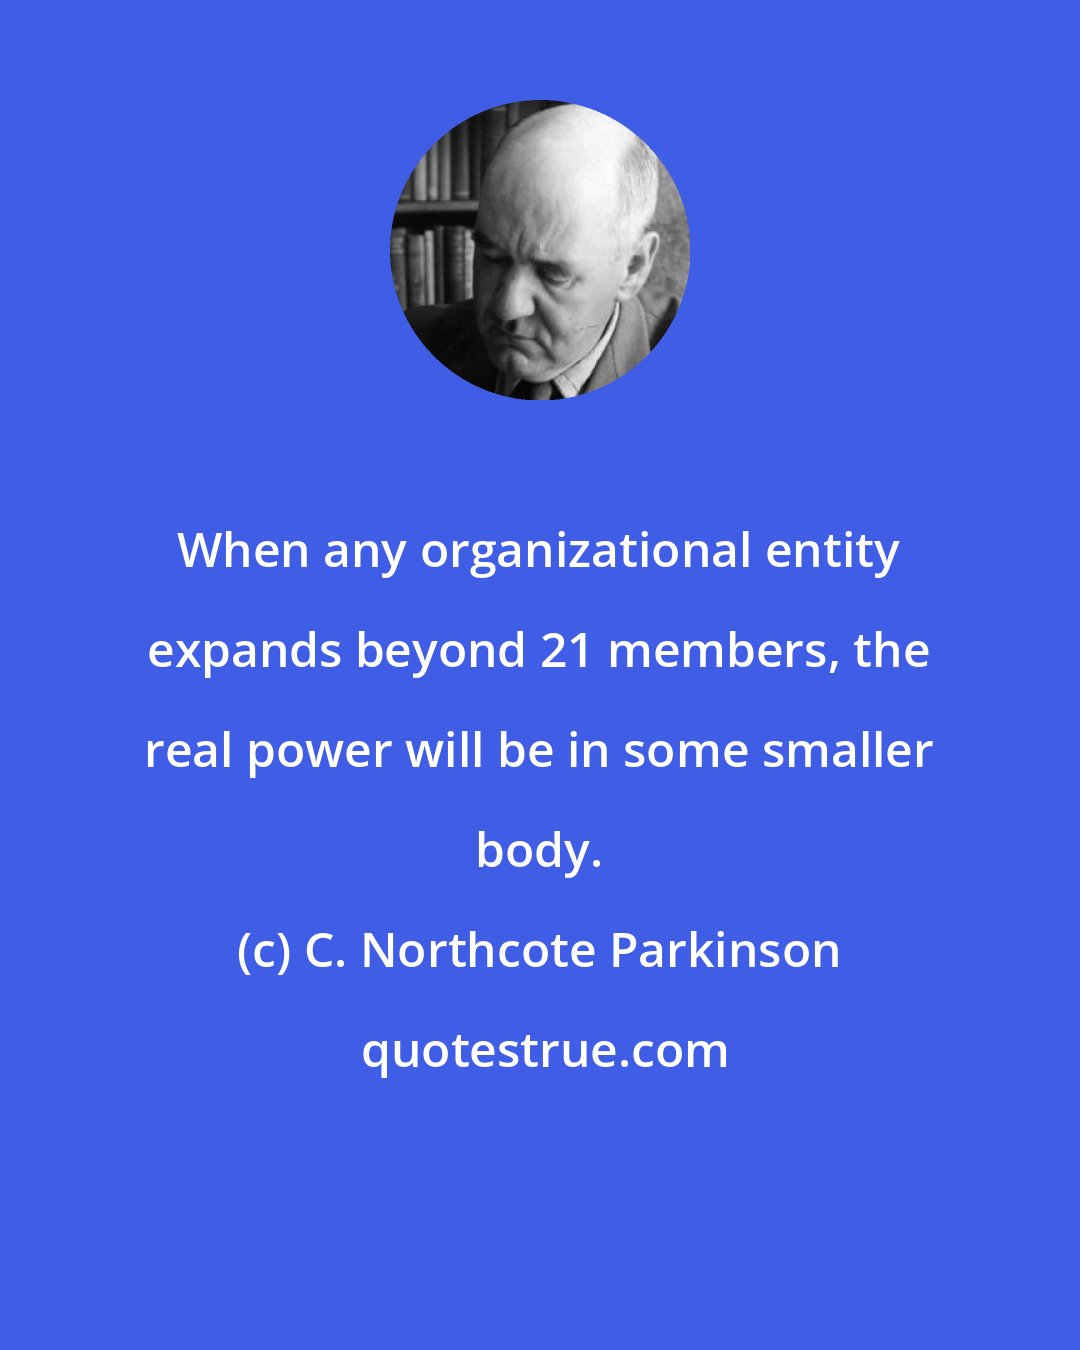 C. Northcote Parkinson: When any organizational entity expands beyond 21 members, the real power will be in some smaller body.